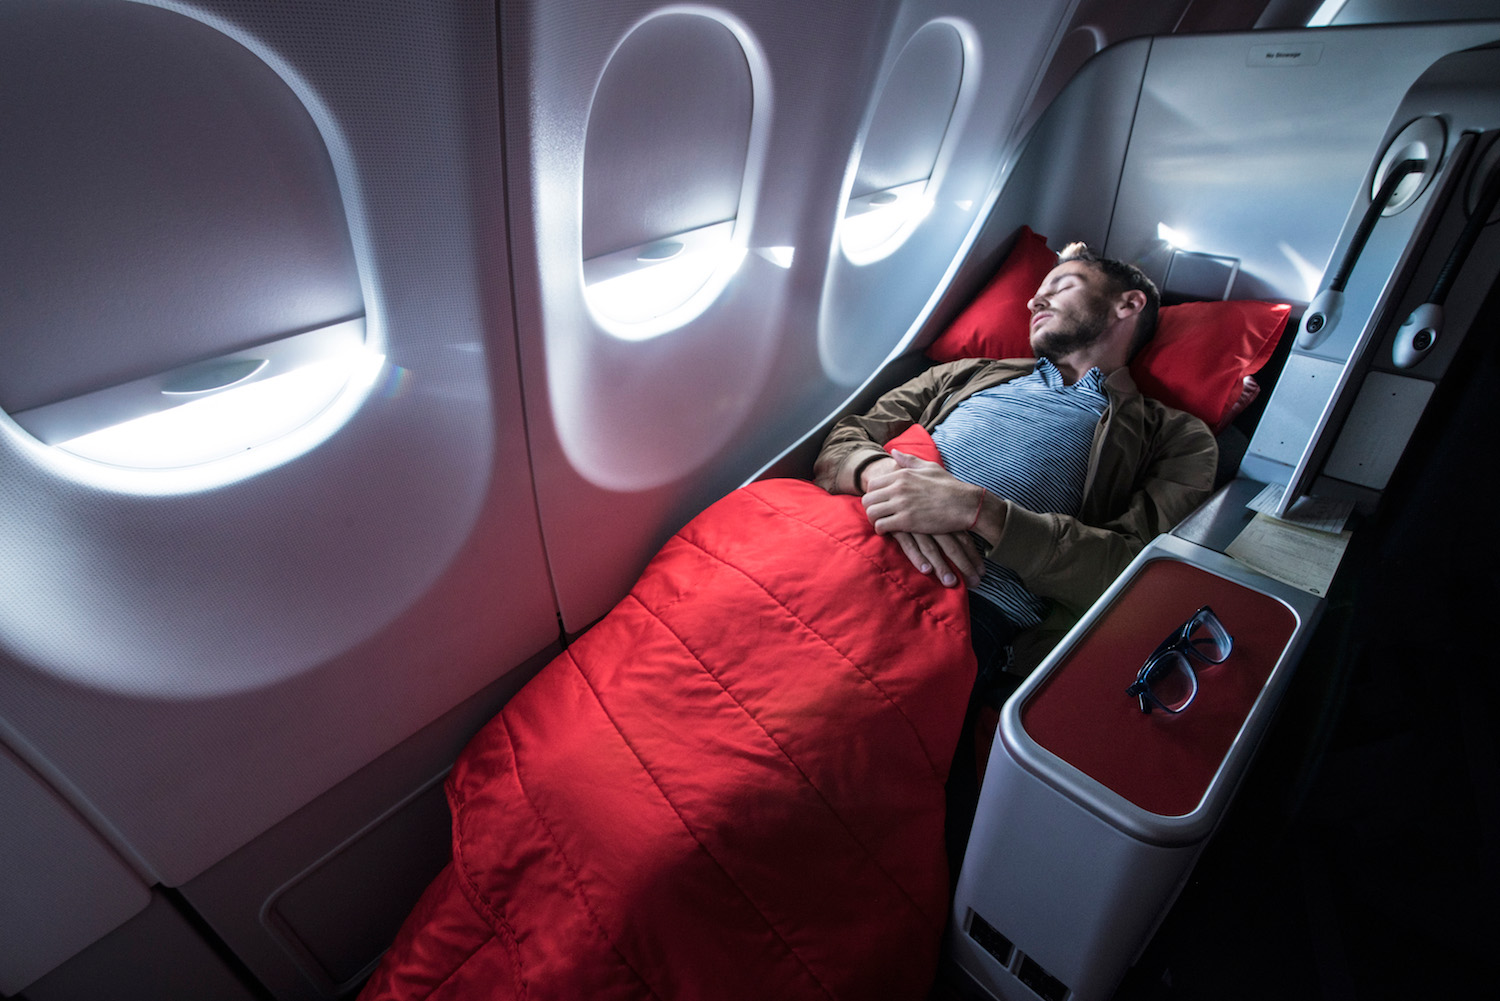 Scoot vs AirAsia: Which is the Best "Business" Class to Japan?